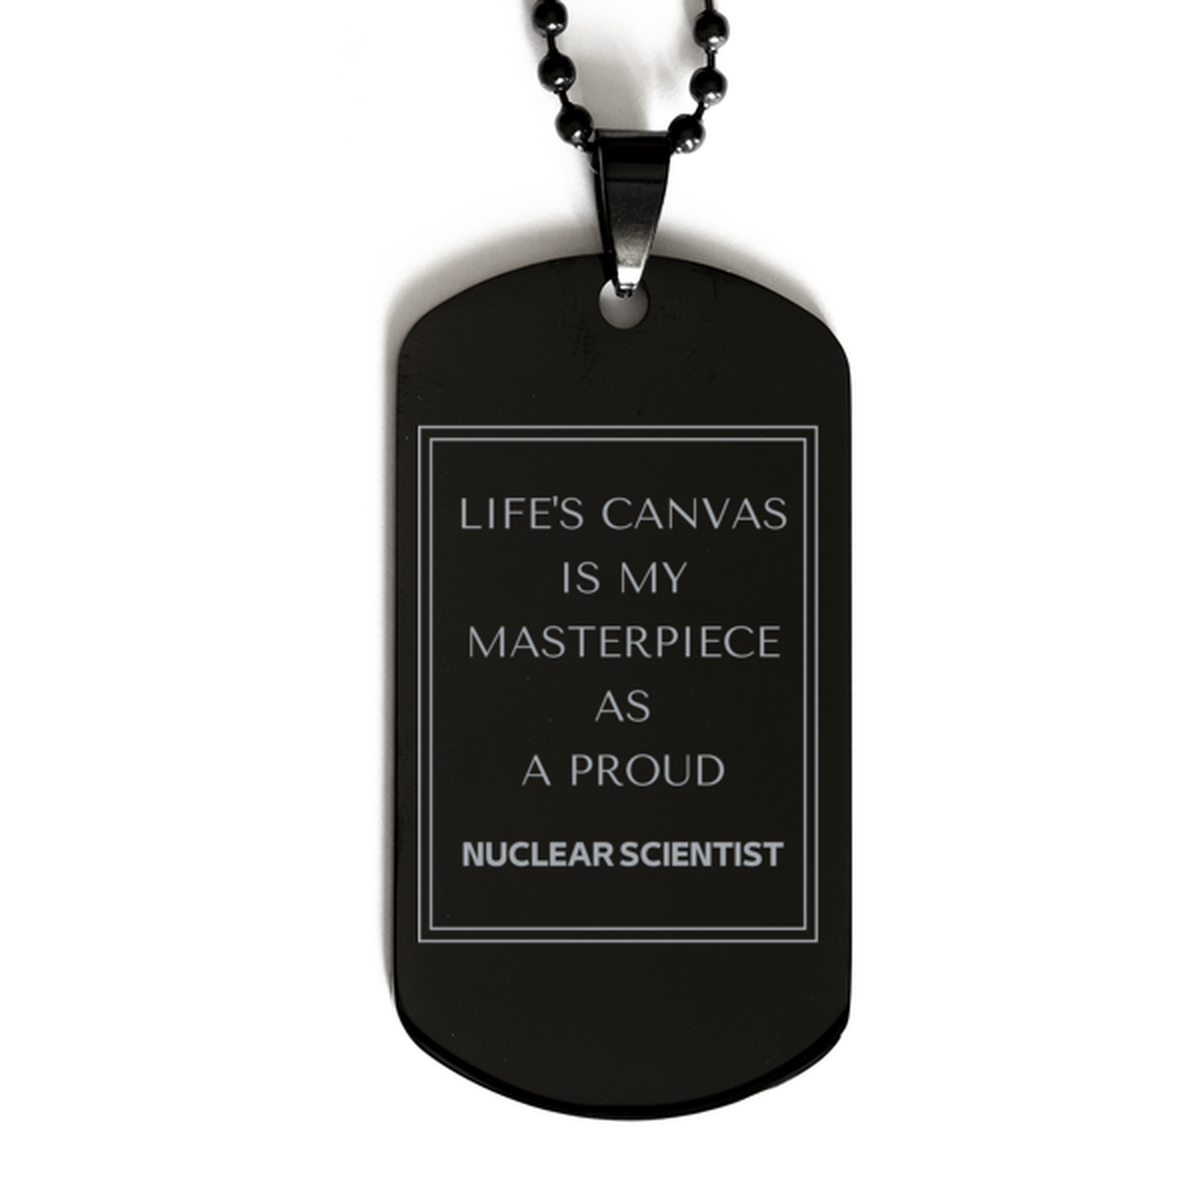 Proud Nuclear Scientist Gifts, Life's canvas is my masterpiece, Epic Birthday Christmas Unique Black Dog Tag For Nuclear Scientist, Coworkers, Men, Women, Friends